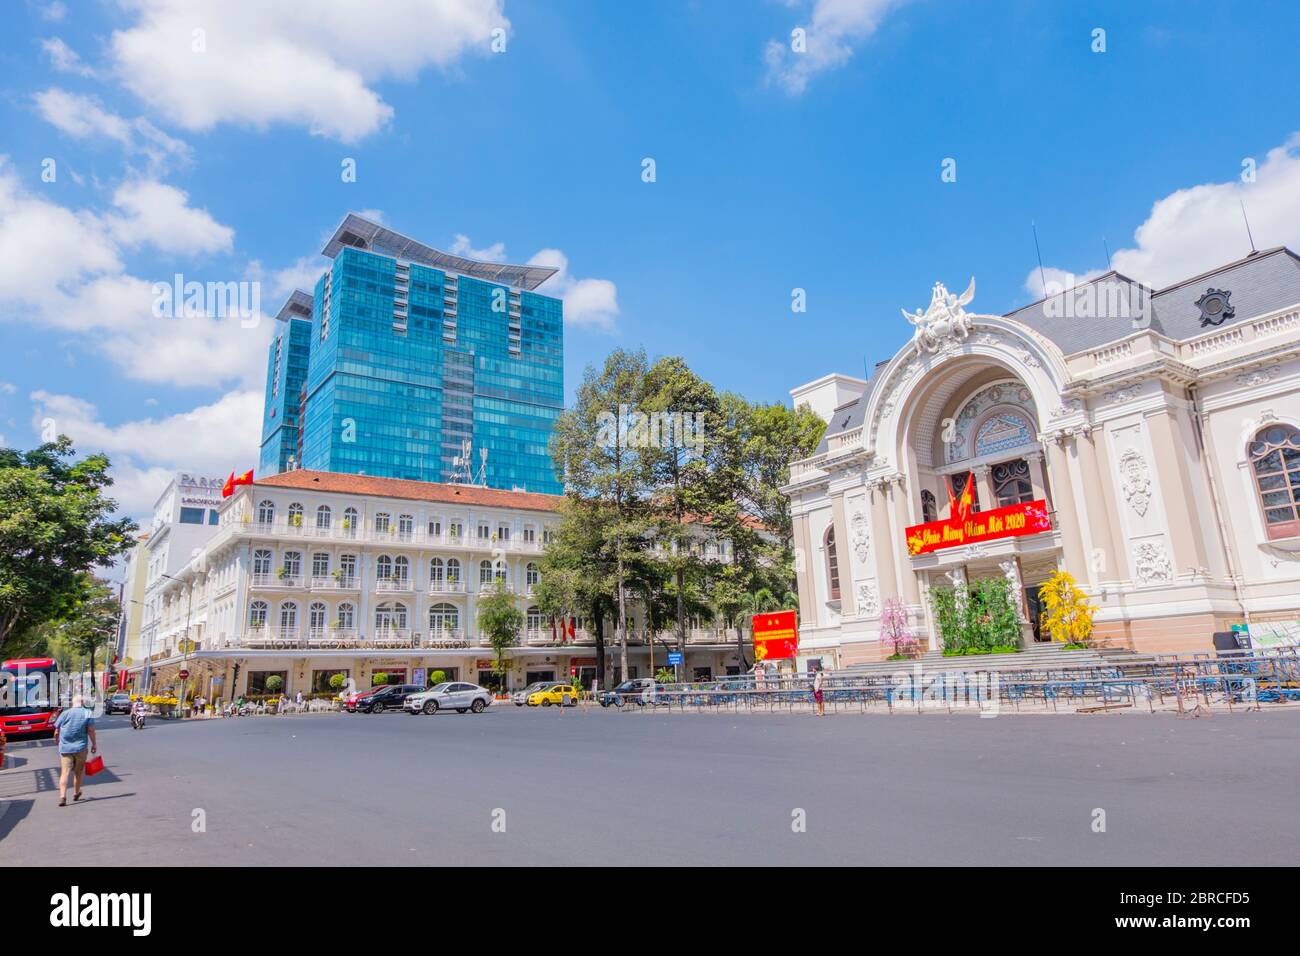 Lam Son square, Dong Khoi street, in front of the Opera House, Dong Khoi, Ho Chi Minh City, Vietnam, Asia Stock Photo